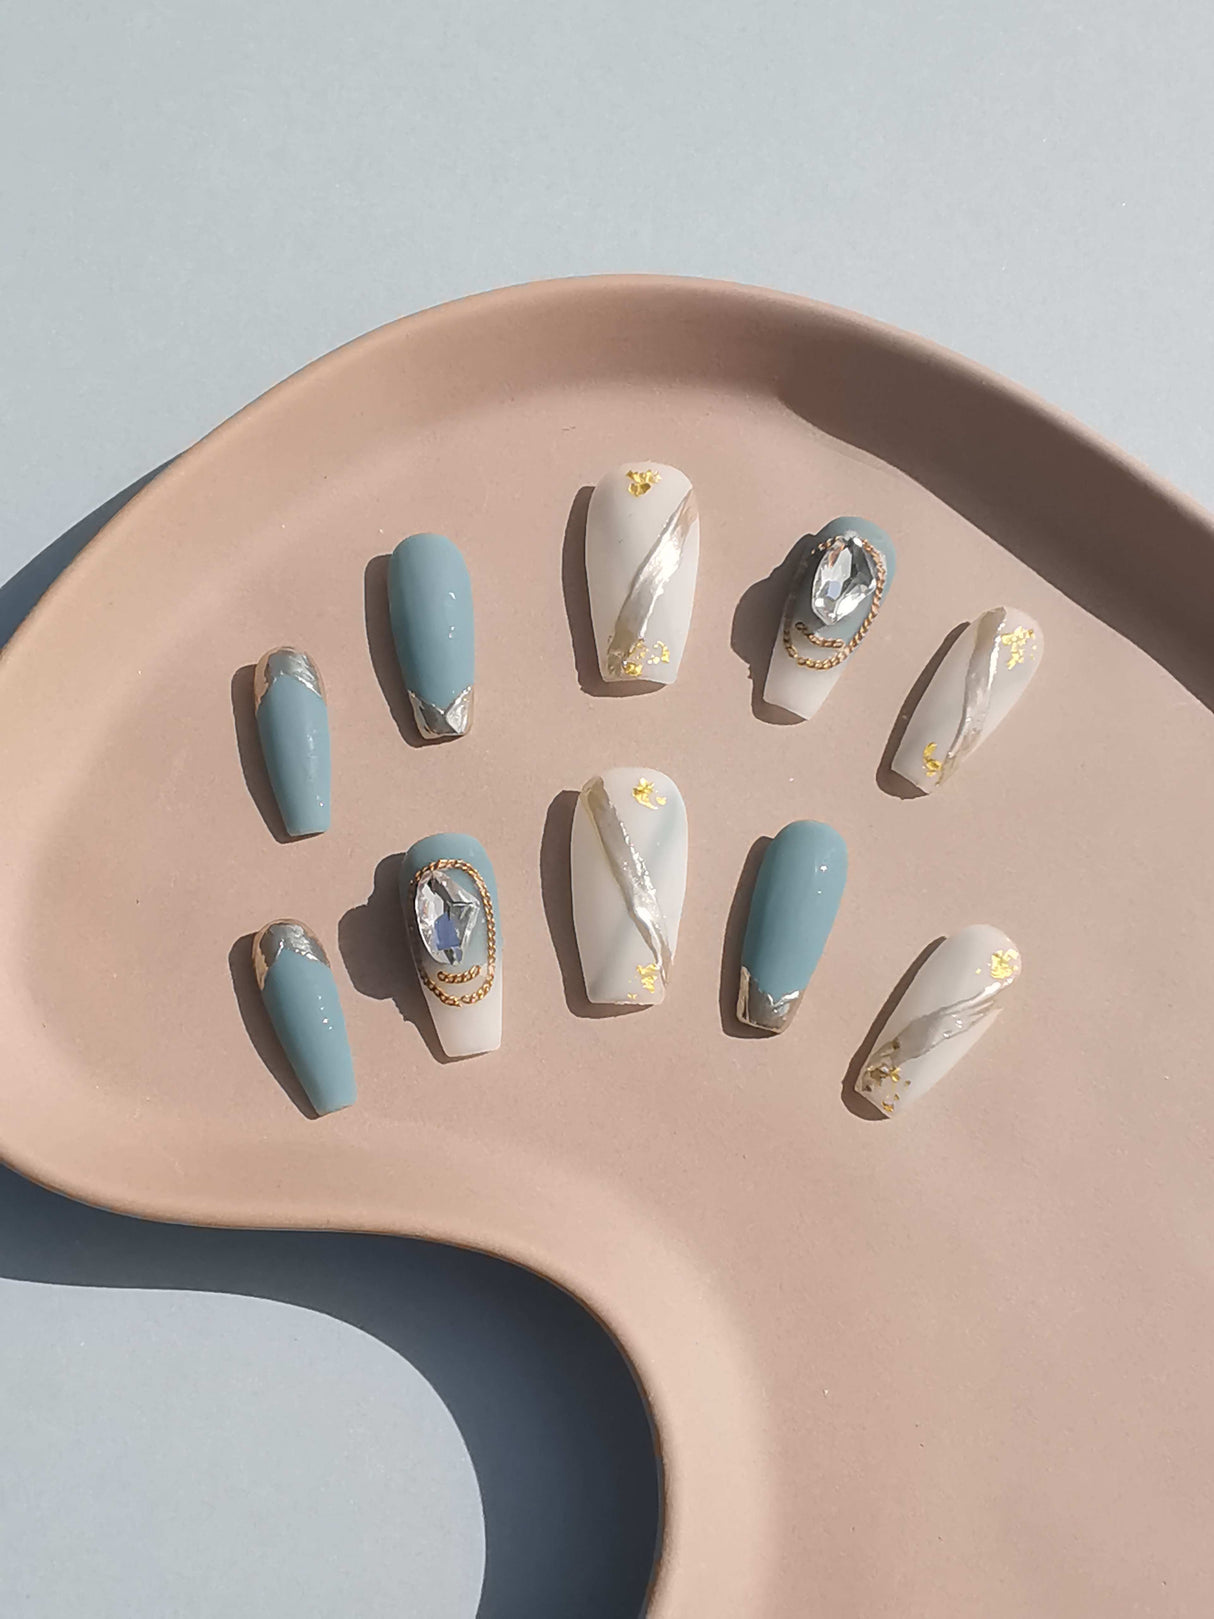 These press-on nails feature pastel colors, matte finish, golden accents, and diamonds. They appeal to those who want to make a statement and stay up-to-date with fashion trends.